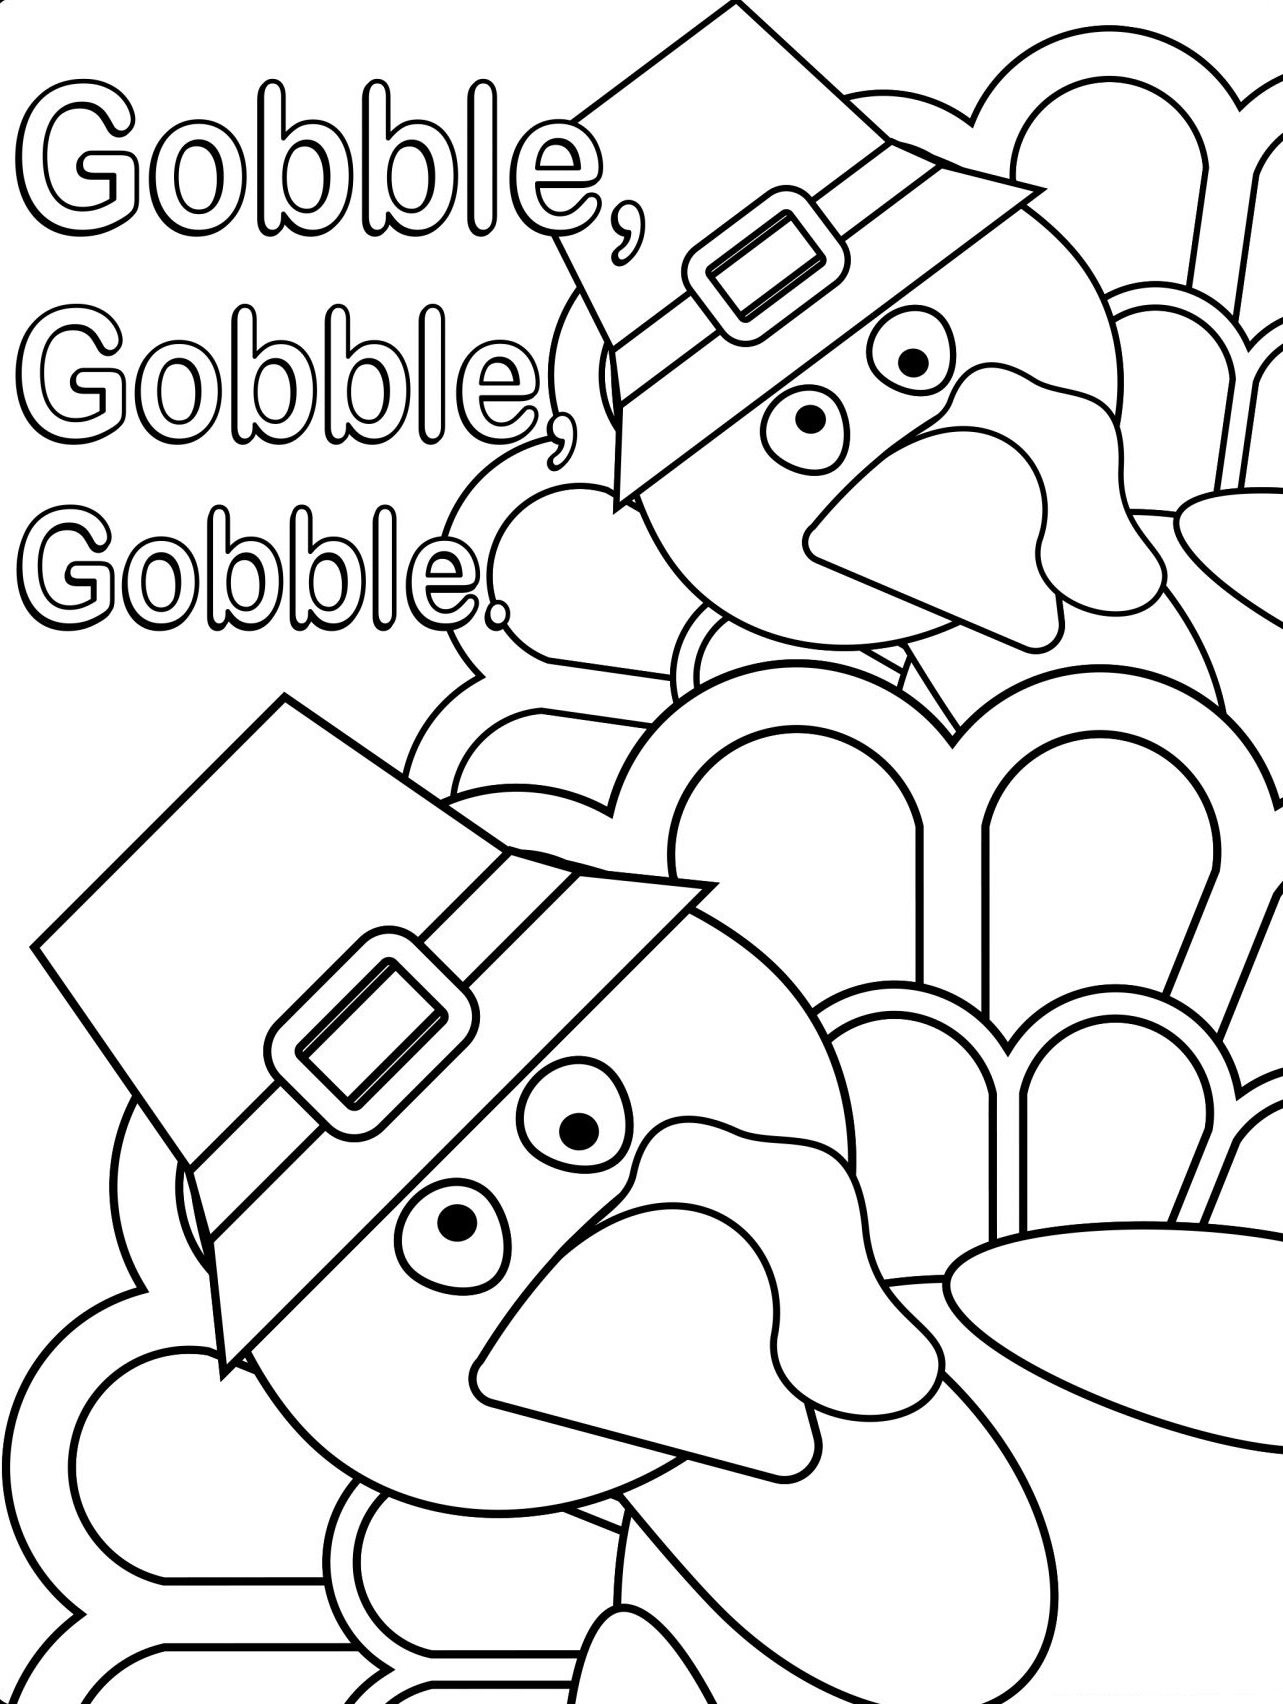 Thanksgiving Turkey Gobble Gobble Coloring Page